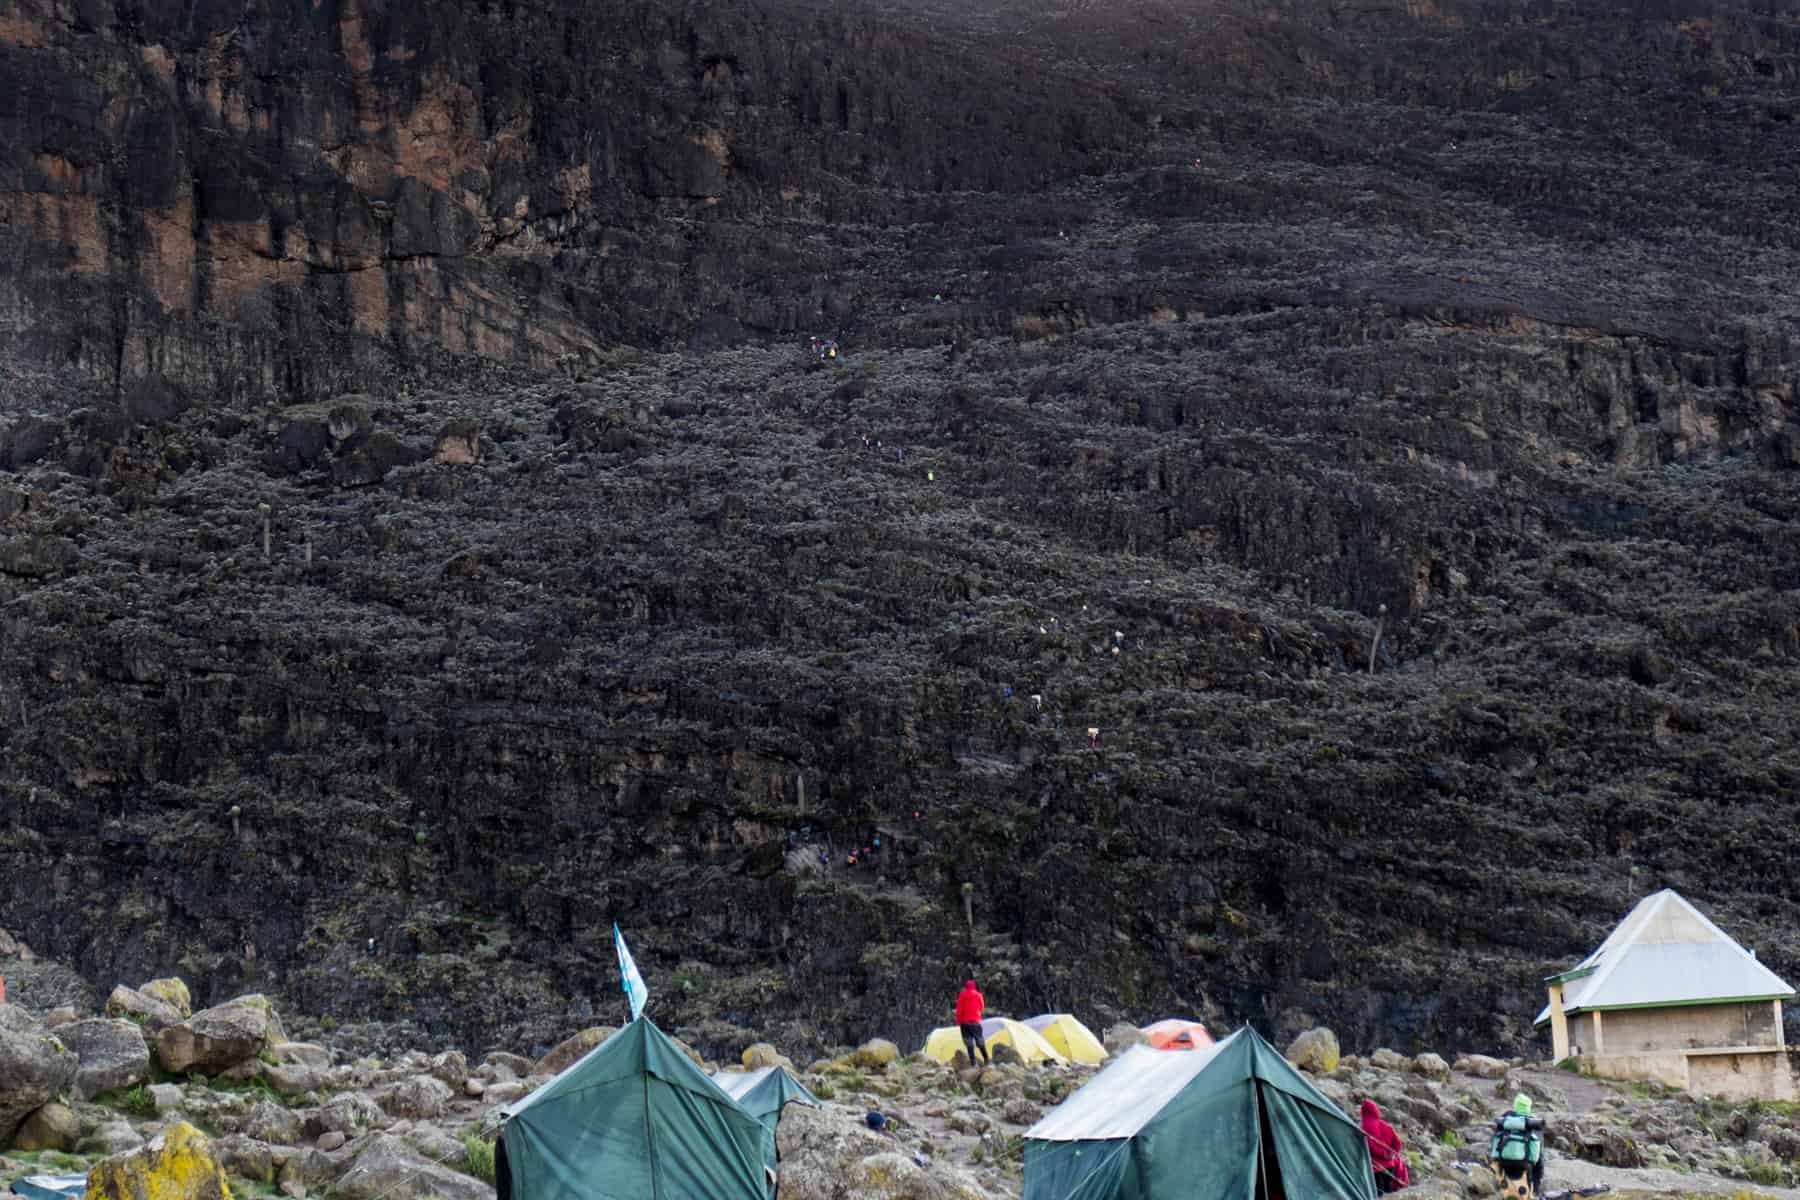 The high, dark steep Barranco wall that rises about camp tents, and a part of climbing Kilimanjaro.